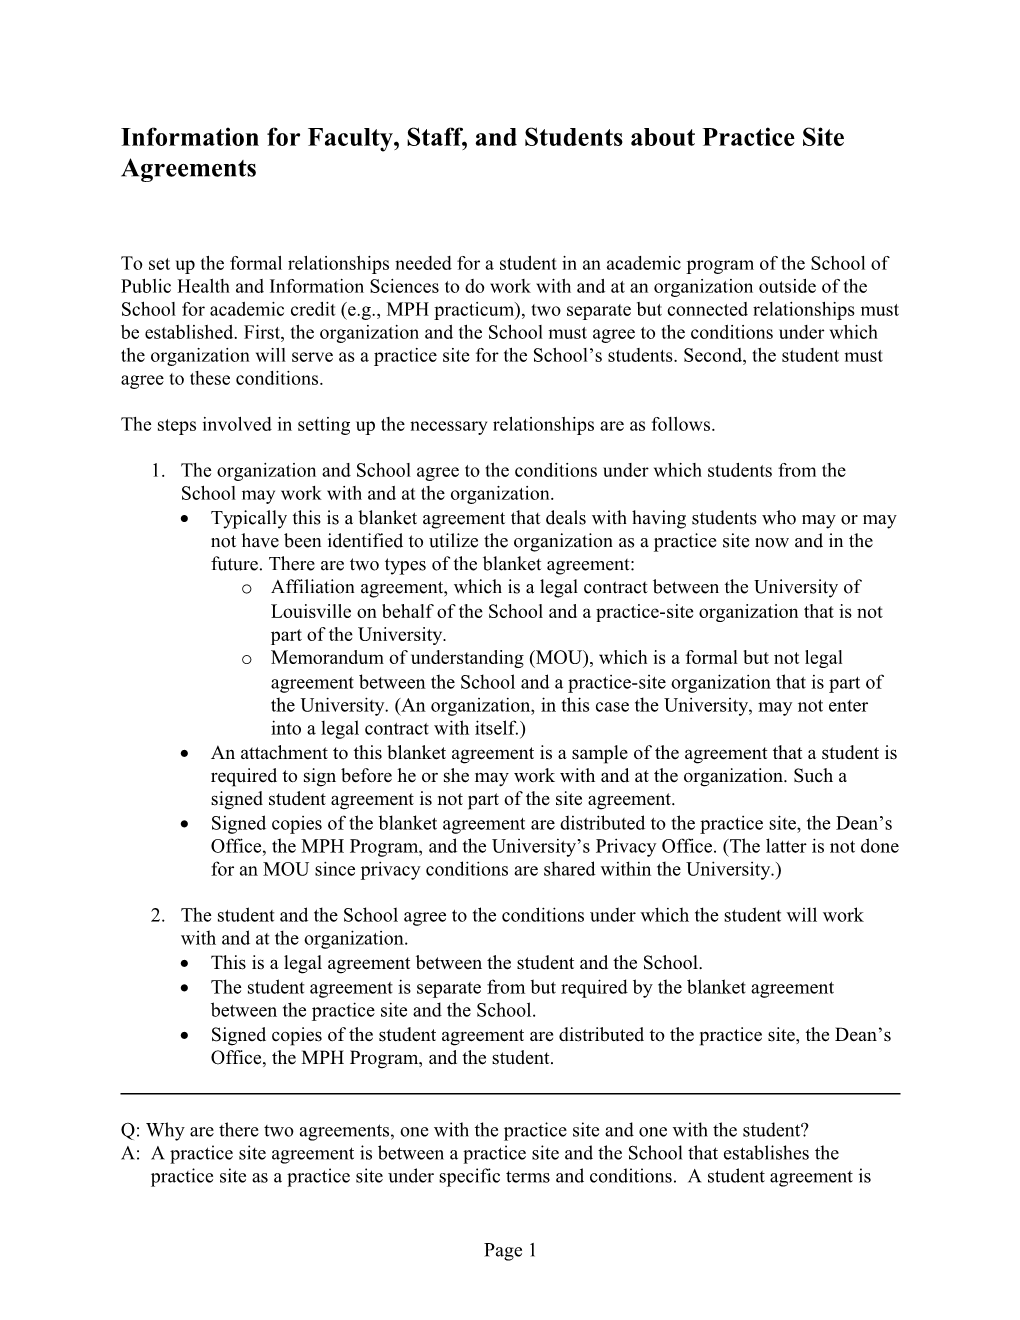 Practice Site Agreement Information for Faculty and Students V1